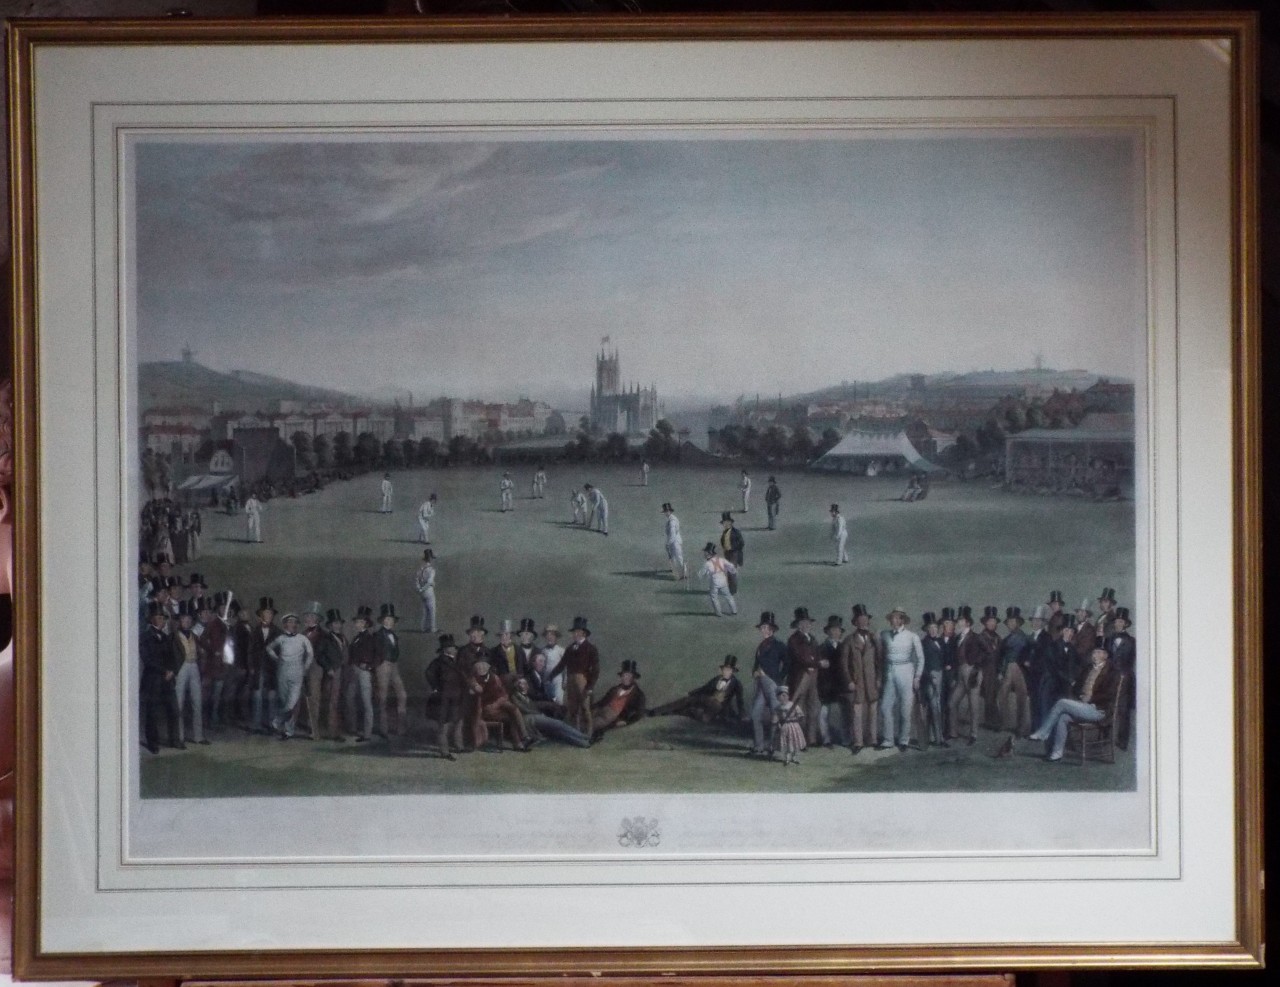 Print - The Cricket Match between Sussex & Kent at Brighton - Phillips